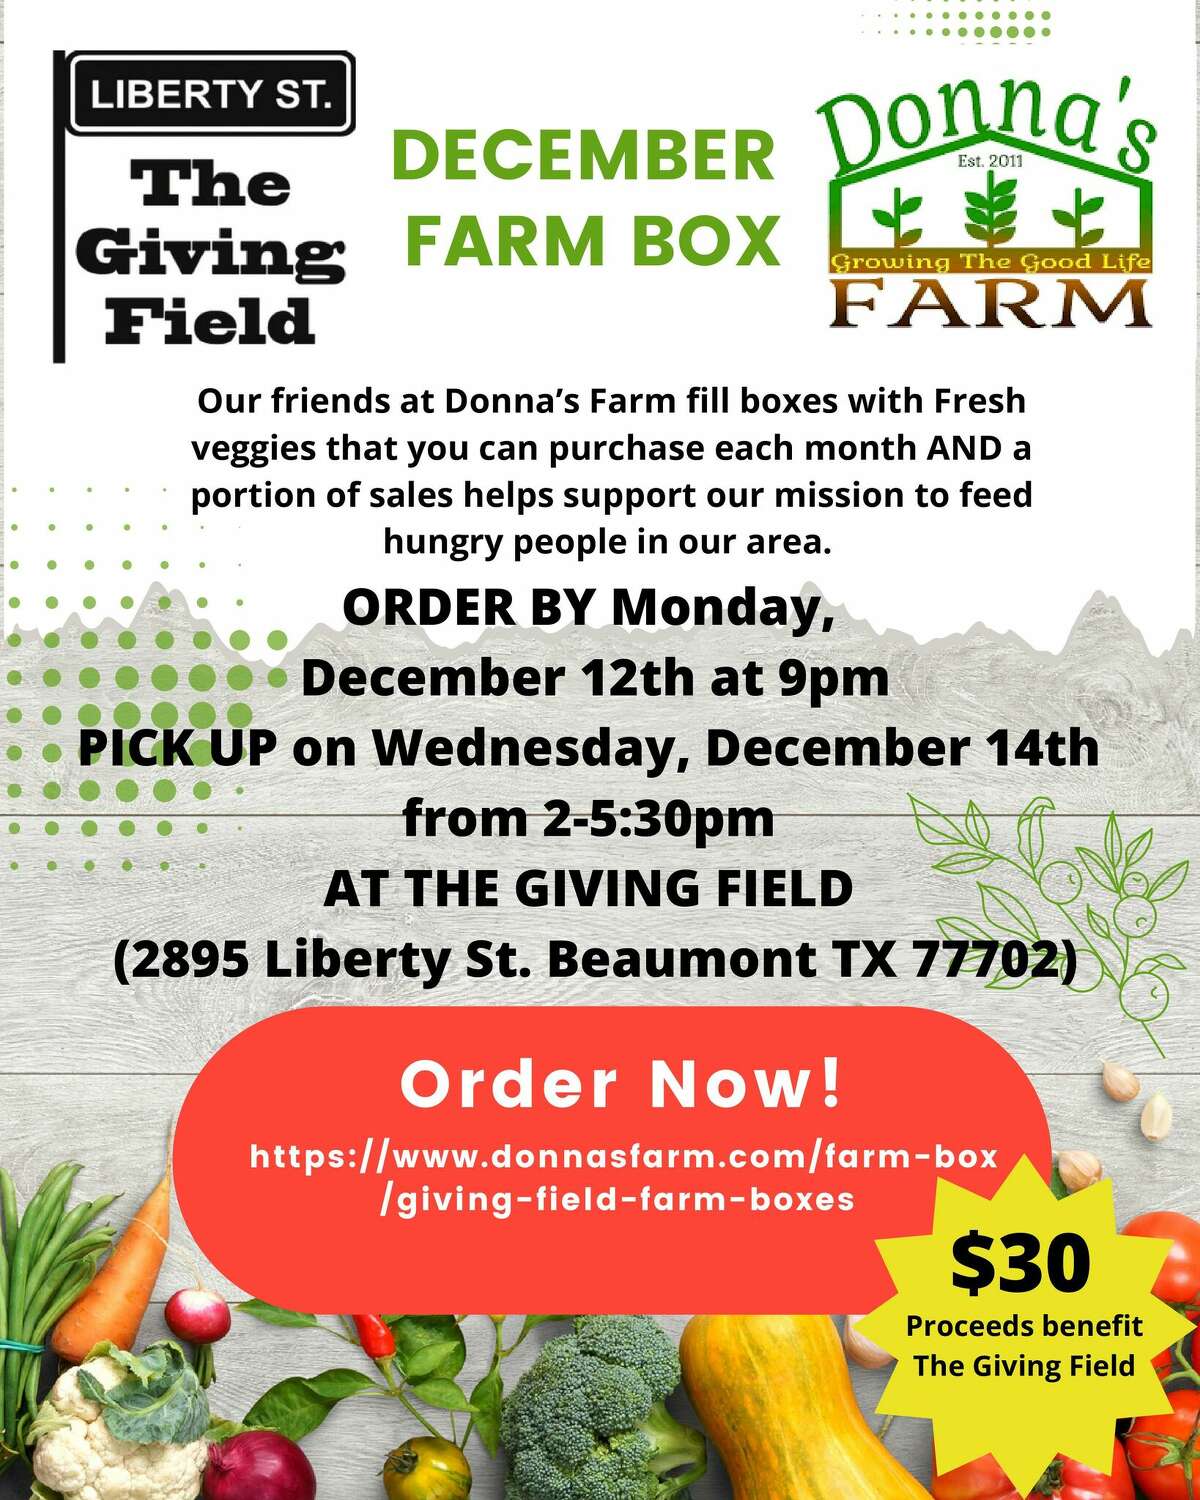 Donna's Farm and the Giving Field offer monthly farm boxes with fresh vegetables.